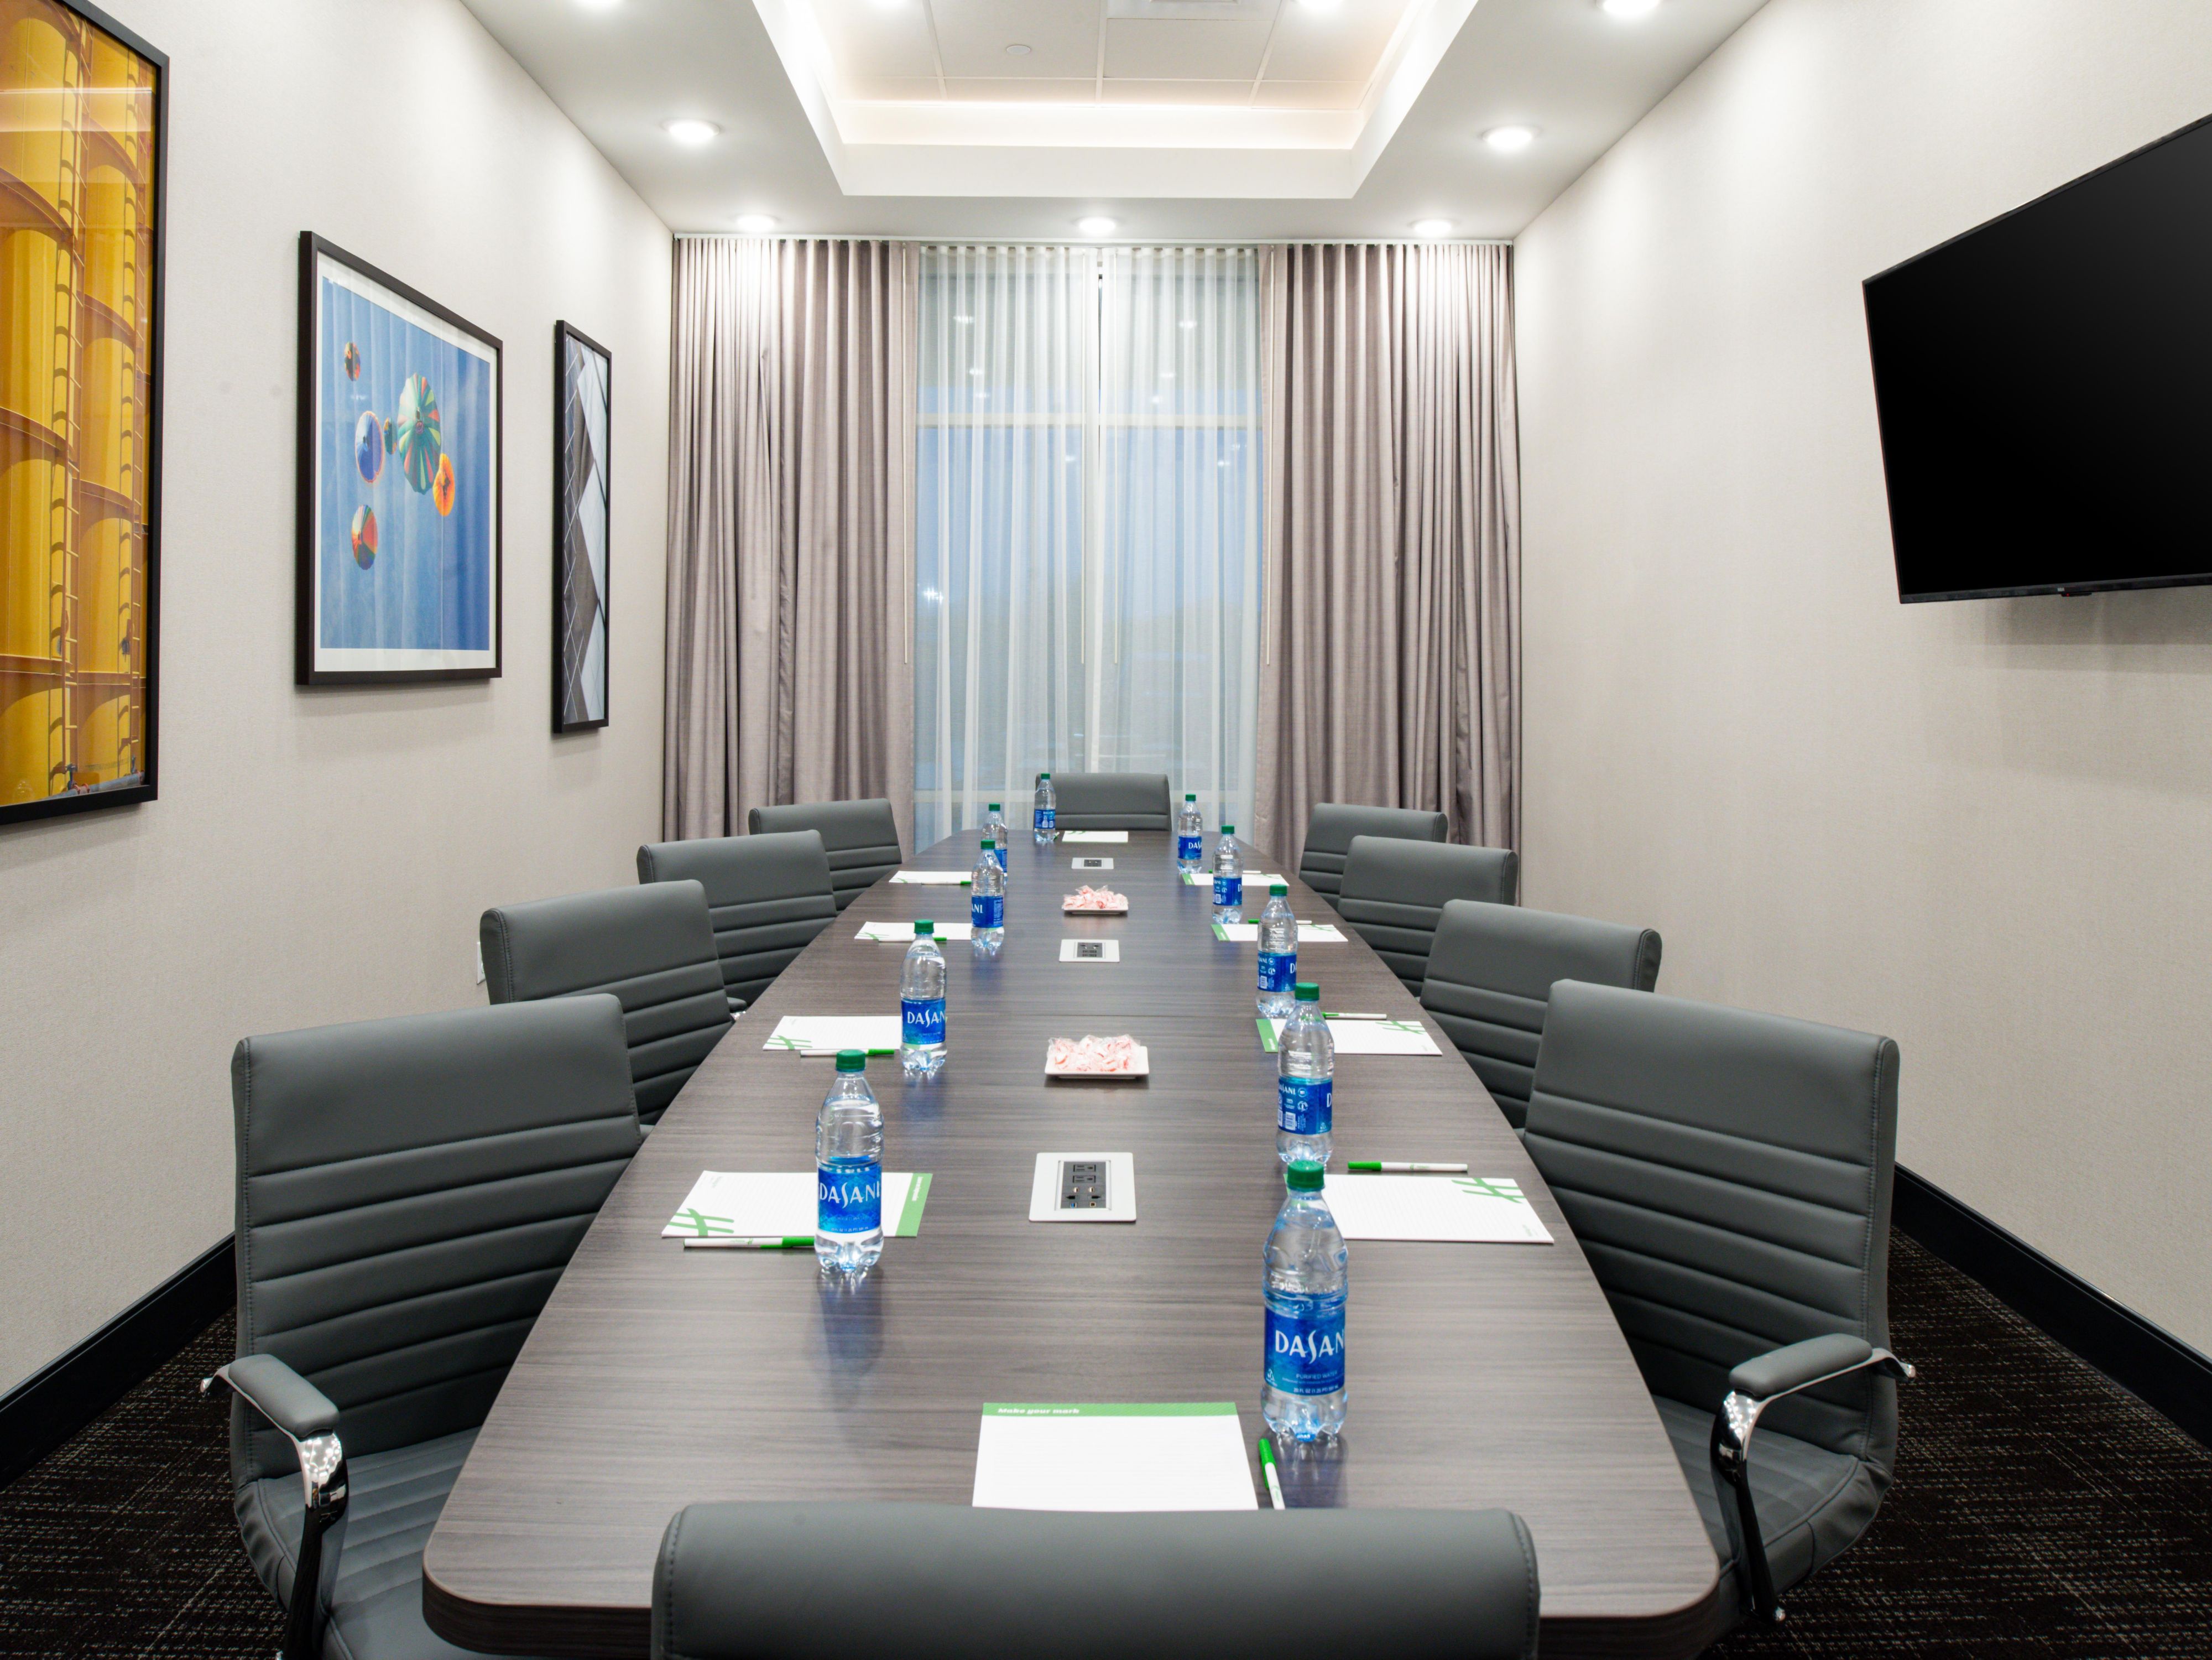 Flexible meeting space available. Call the hotel directly to book your next event or meeting. 